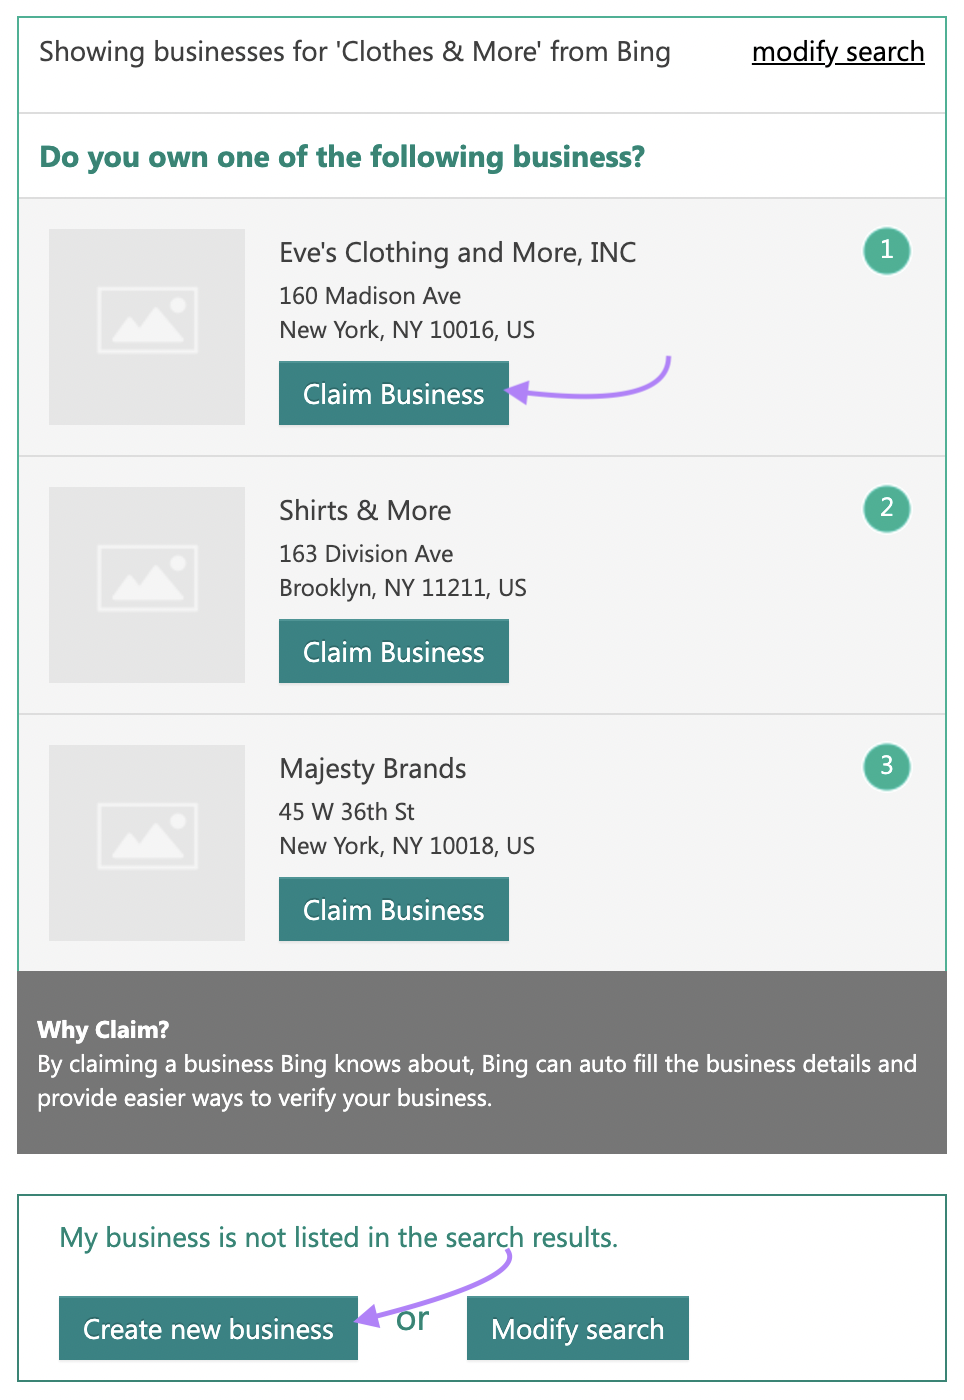 a page showing businesses to "Clothes & More" from Bing, where you can either claim a business or create new